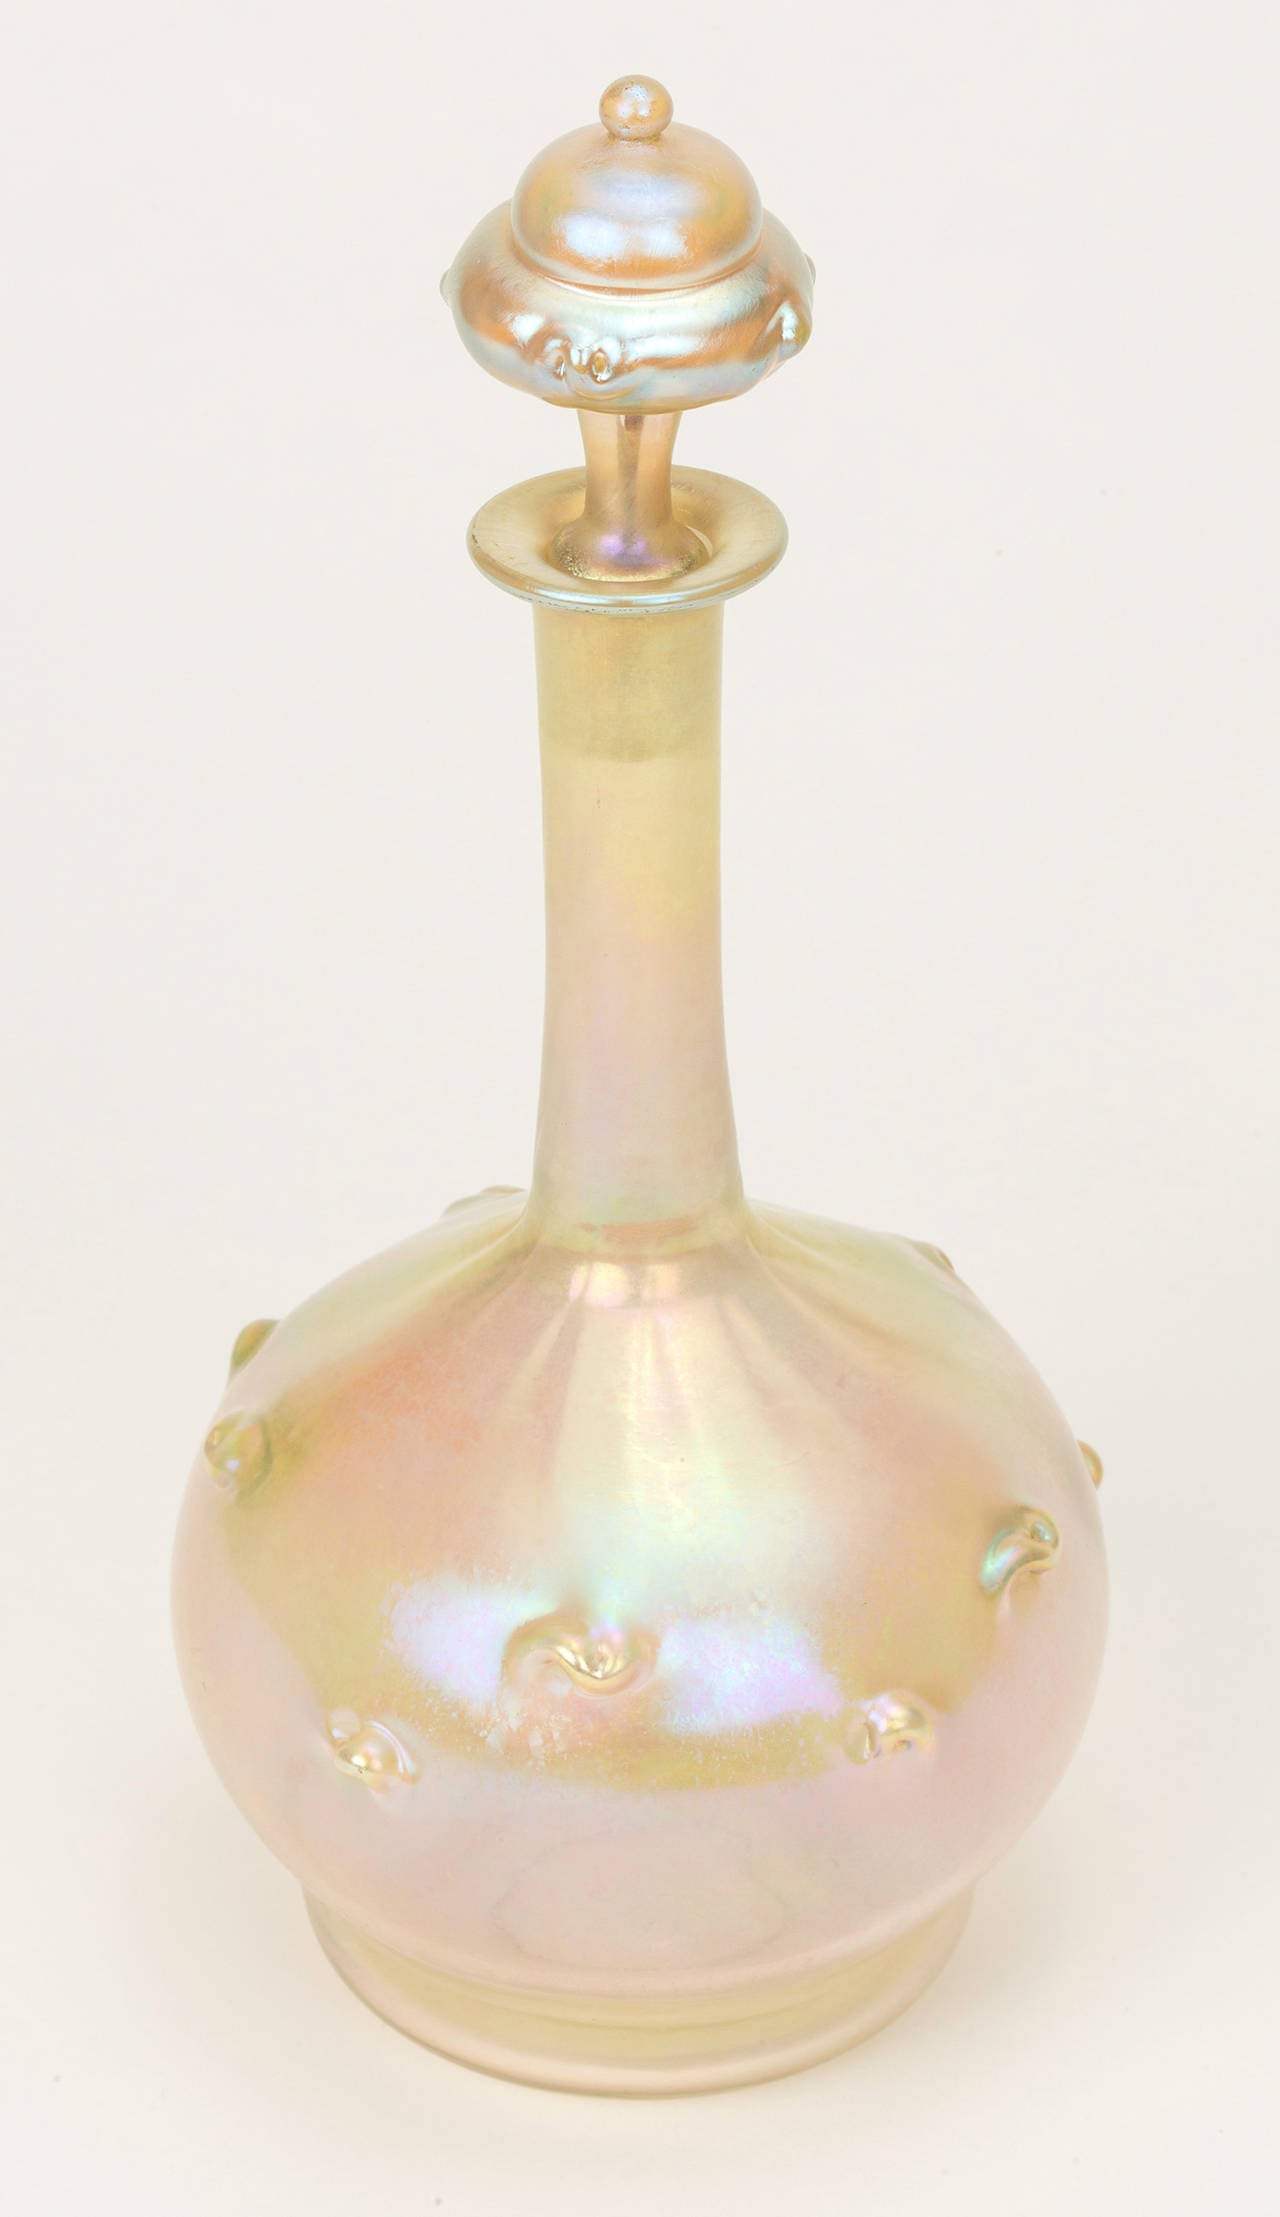 Hand-Crafted Tiffany Studios Favrile Glass Decanter Cordial Set For Sale